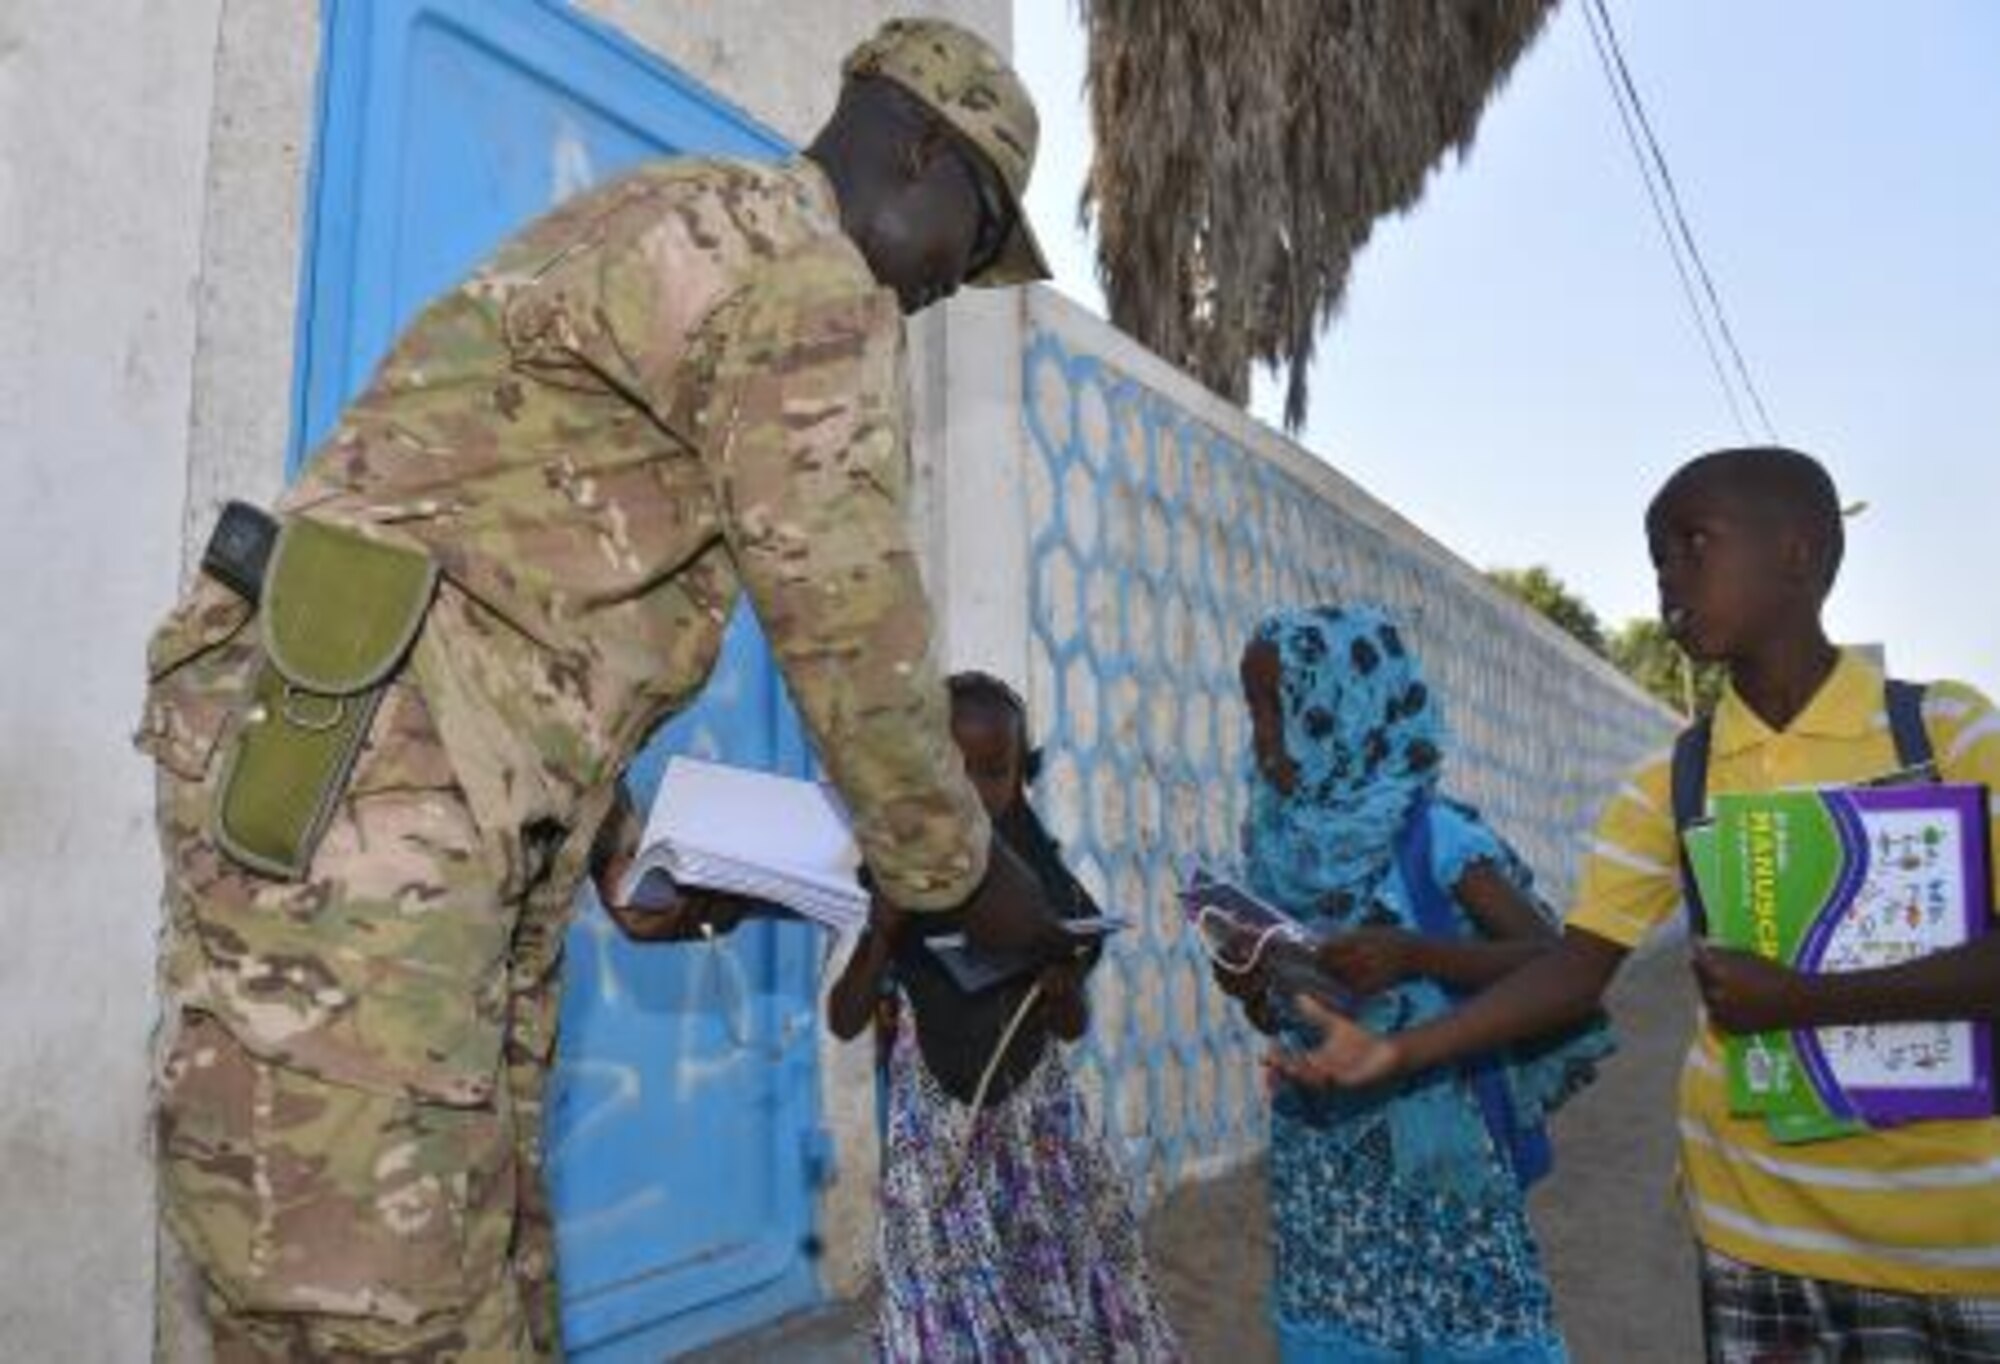 Staff Sgt. Deng Pour, Combined Joint Task Force-Horn of Africa, non-commissioned officer in charge of religious affairs, gives school supplies to local children in Djibouti Dec. 15, 2013. Pour’s goal while in Africa is to give back to his peers and country. (U.S. photo by Staff Sgt. Antoinette Gibson)

